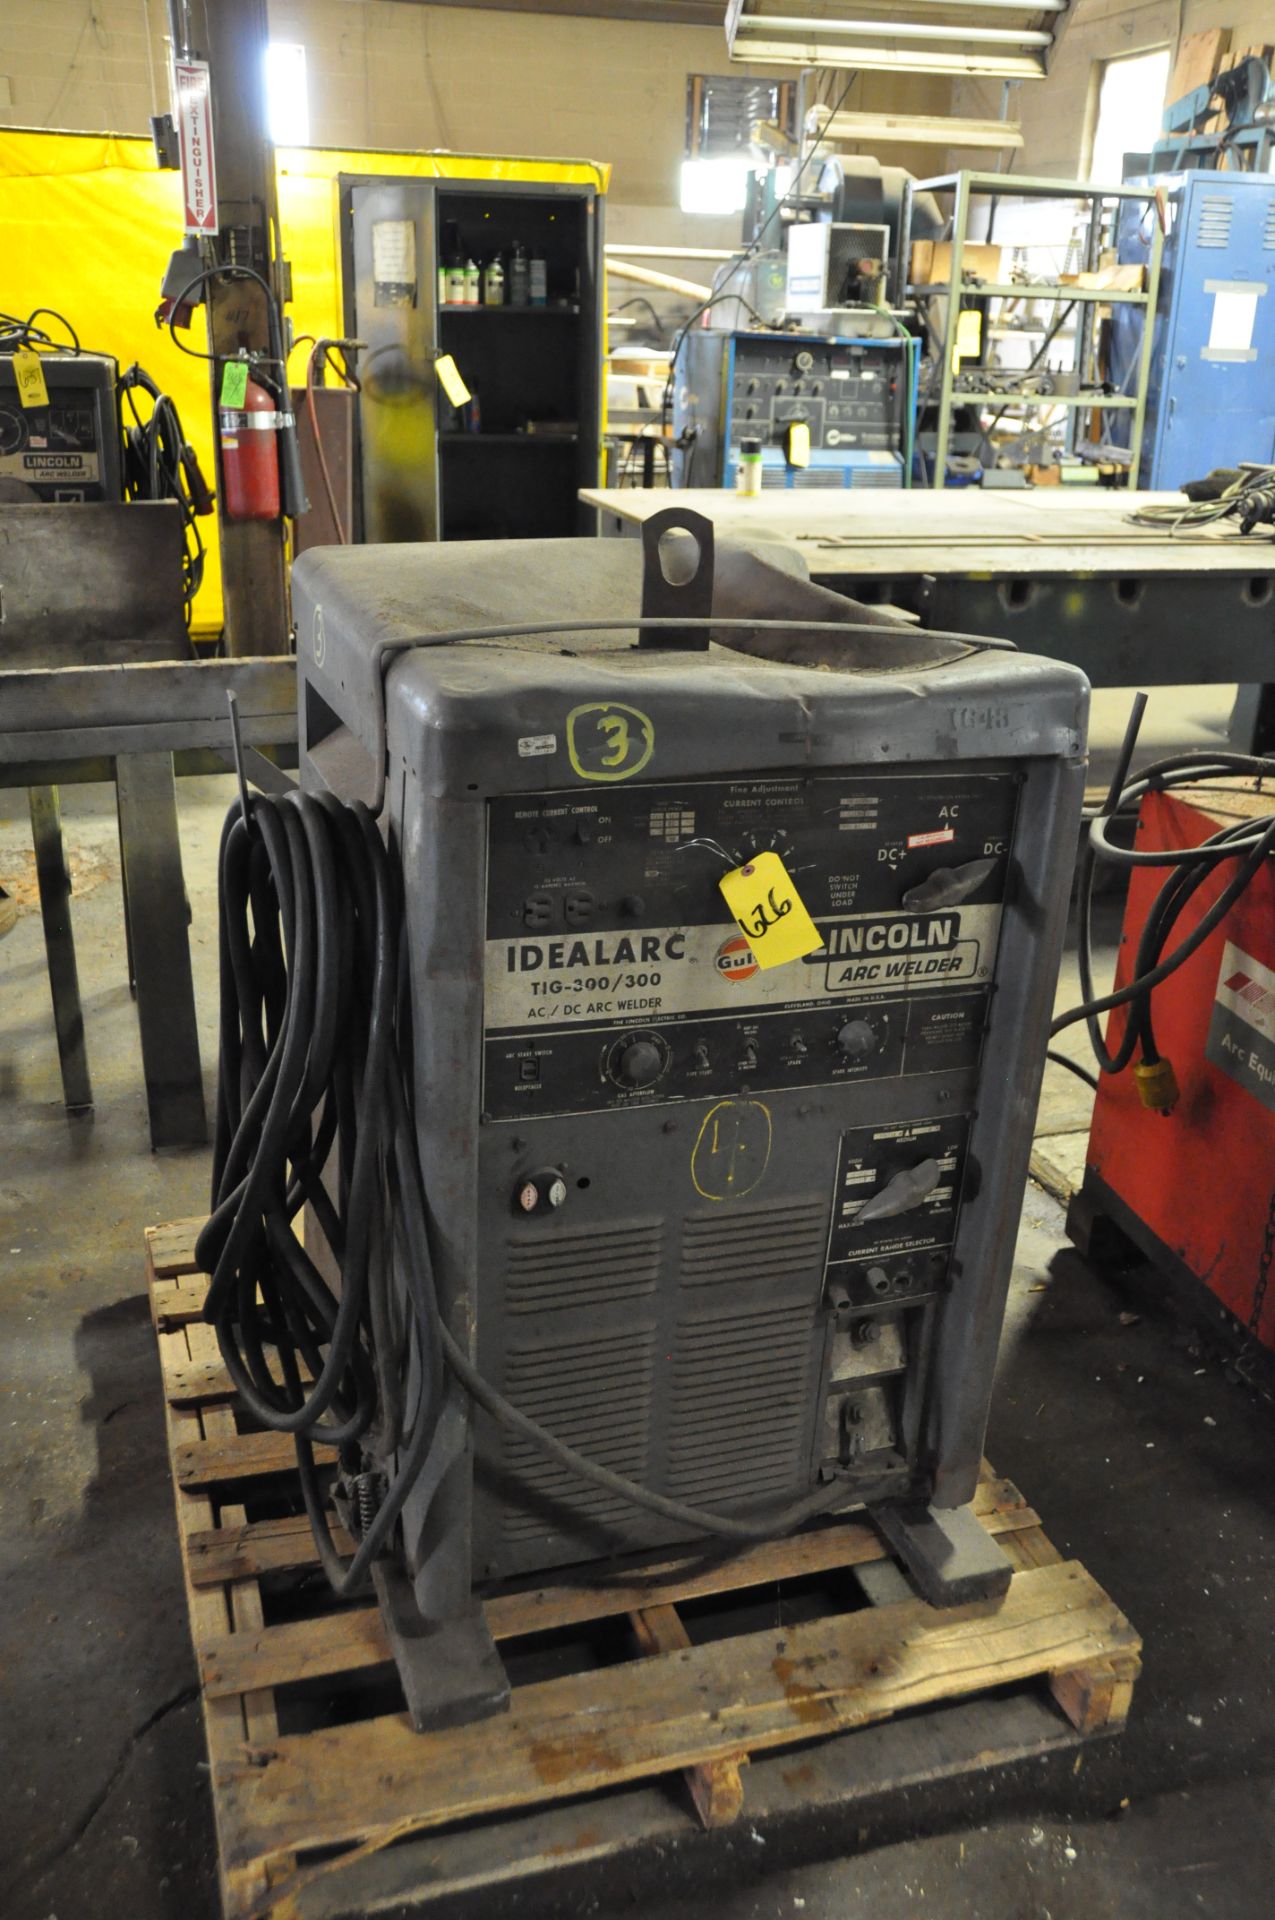 LINCOLN IDEALARC WELDER WITH GROUND CABLE.